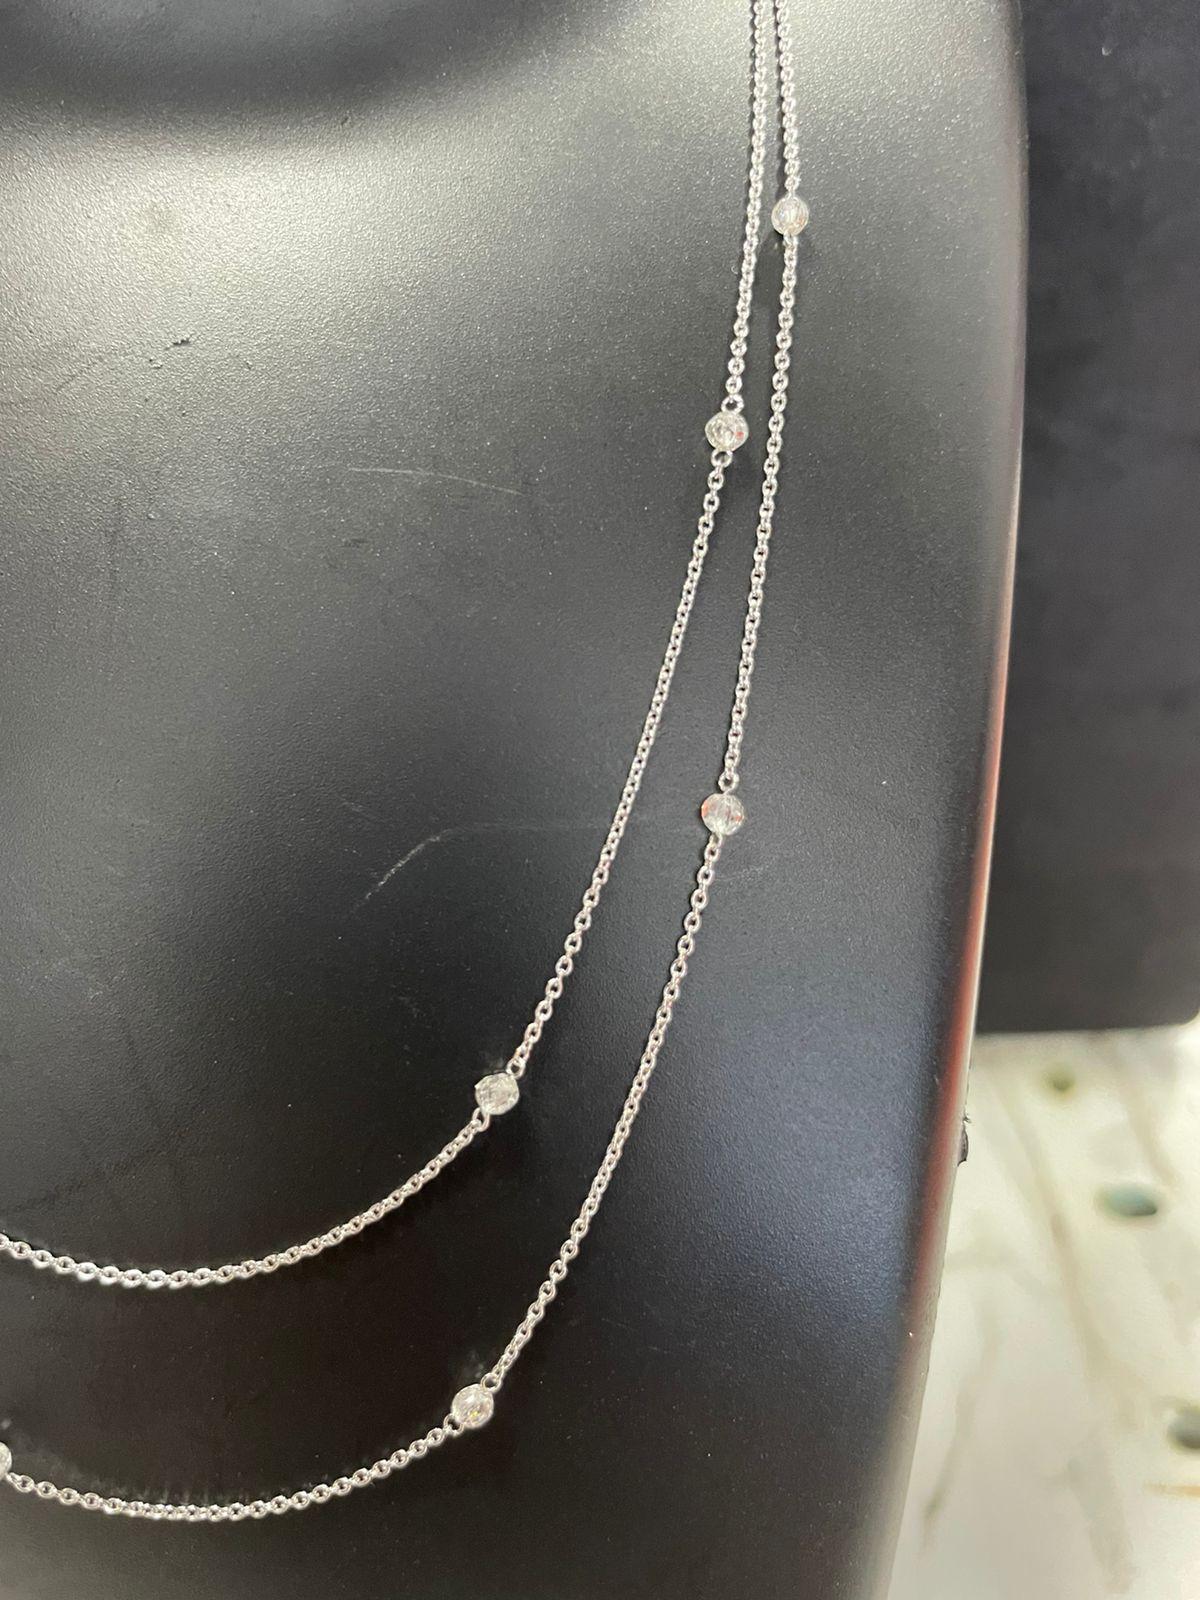 Panim Beads Diamond 2 layer Necklace in 18 Karat White Gold

In this necklace Beads diamonds are evenly spaced on a white gold chain. This is a piece that can be worn everyday, alone or layered with other necklaces.

18K White Gold
Handmade in India